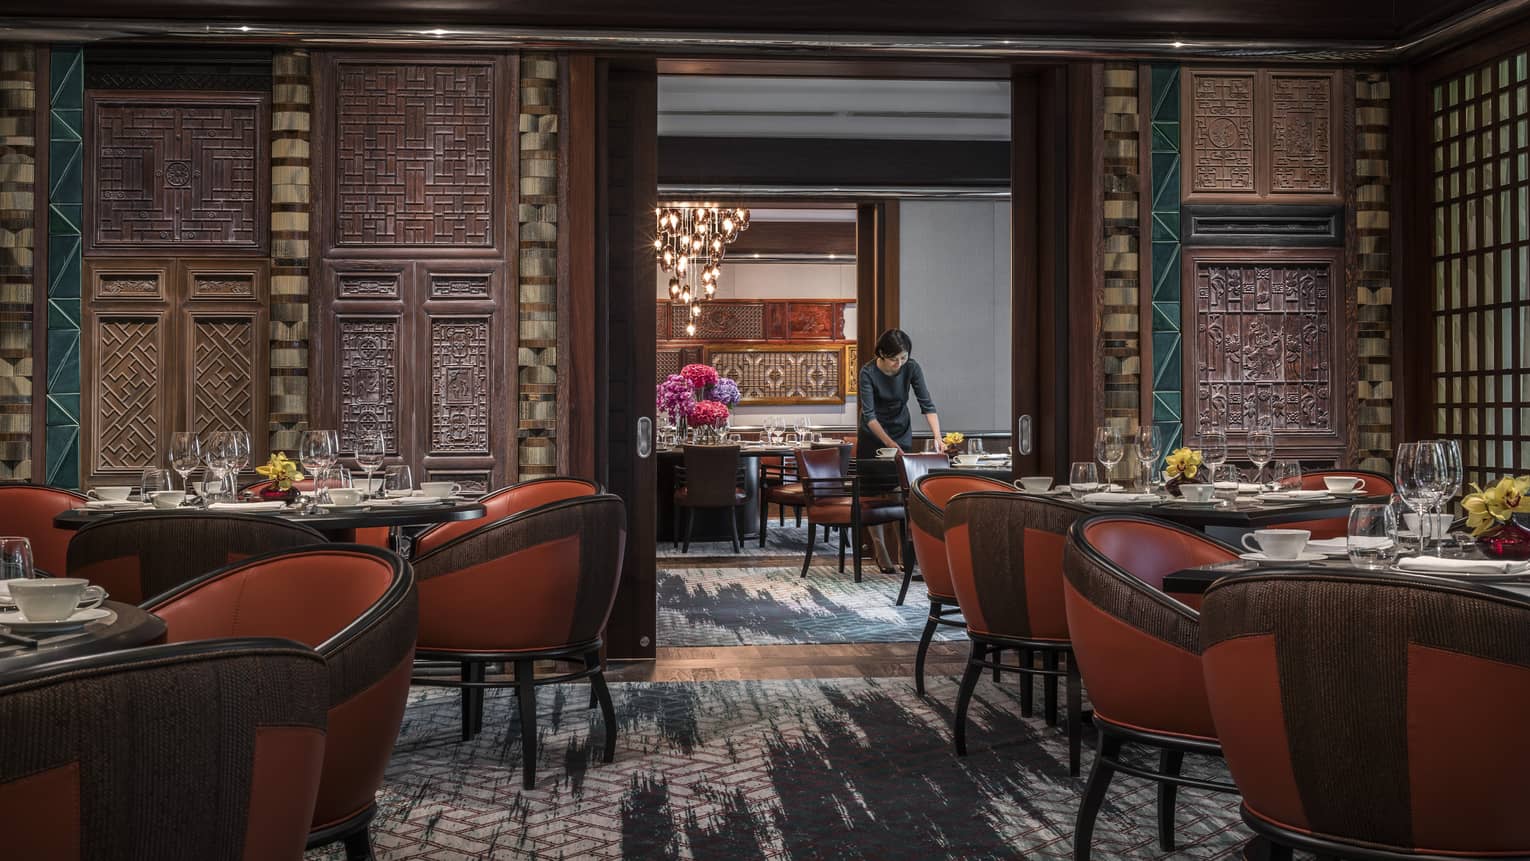 Woman sets table at Jiang-Nan Chun, Michelin-starred Cantonese restaurant, with red leather bucket chairs around dining tables, carved wood walls.